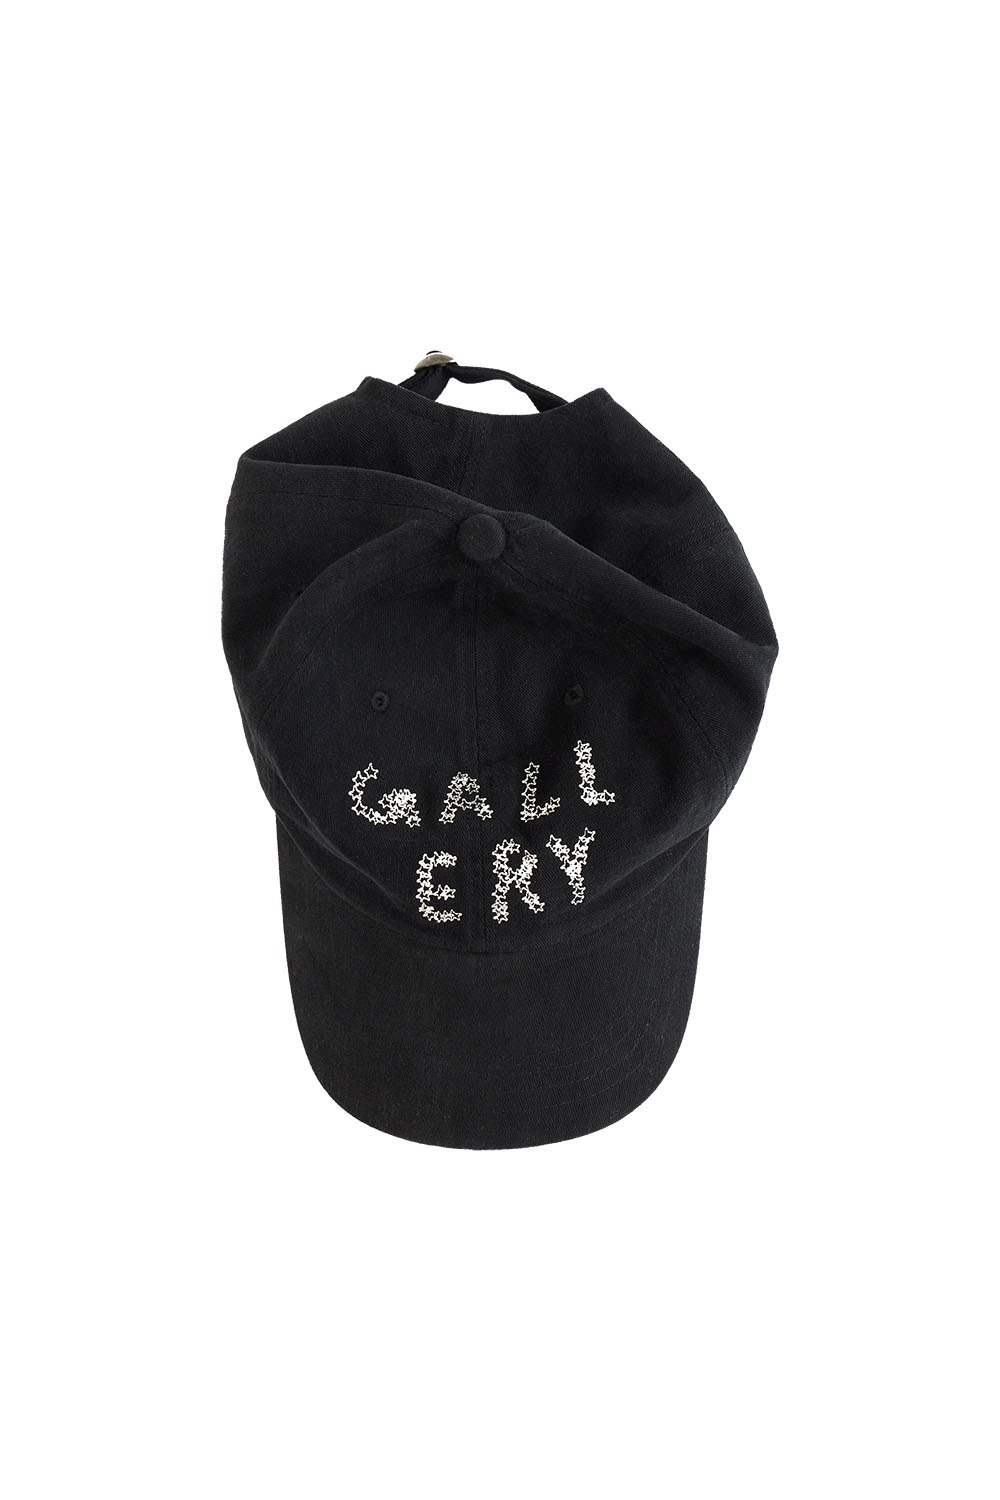 Gallery Embroidered Ball Cap - Black